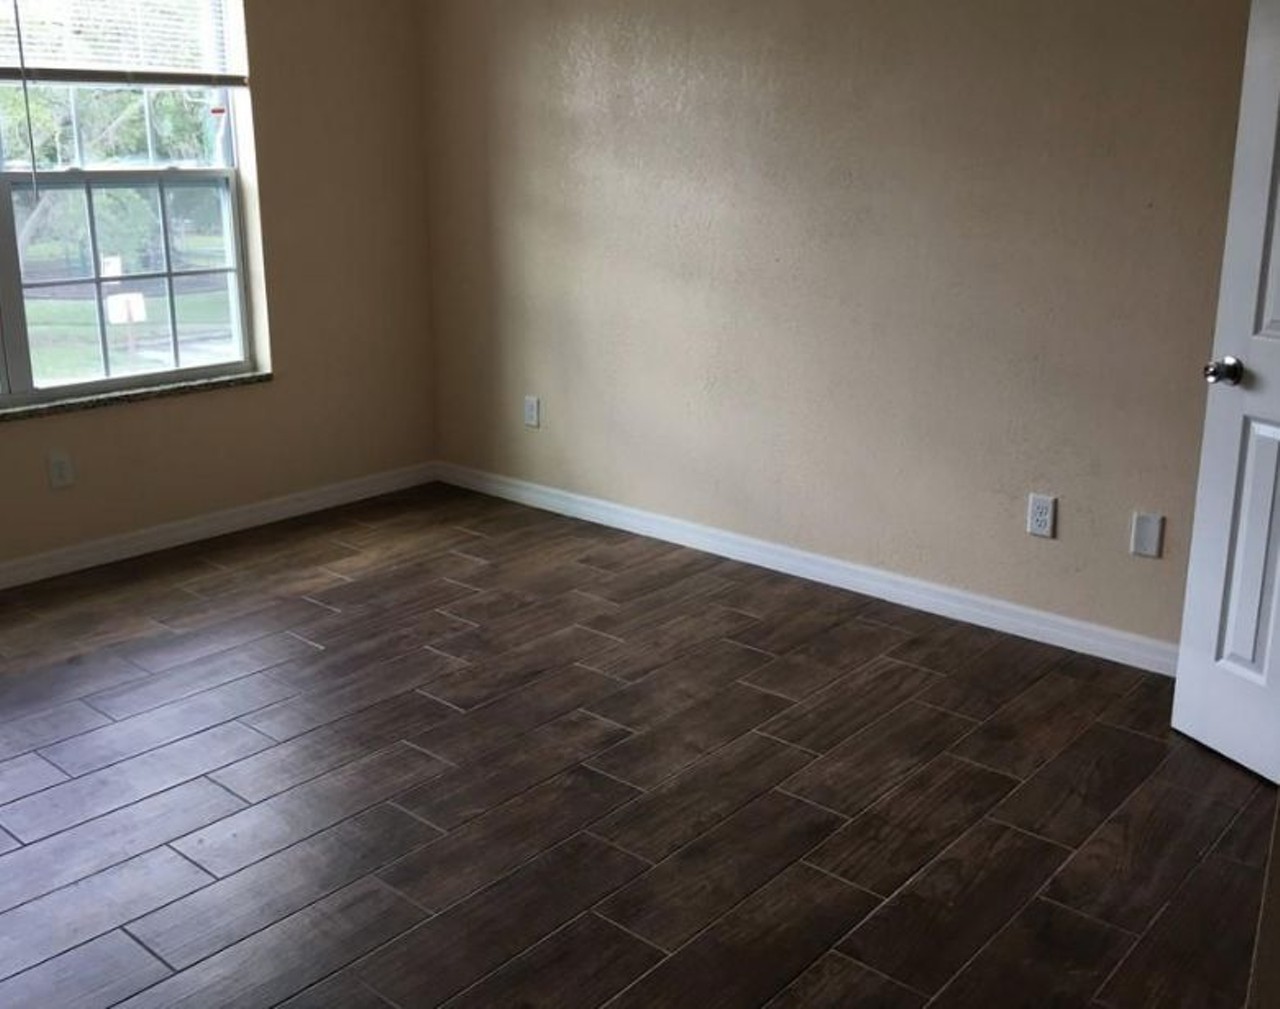 5600 Devonbriar Way, Orlando
$1,175/mo
2 bed, 2 bath, 935 sqft
These hardwood floors go throughout the whole place, including the bedrooms.